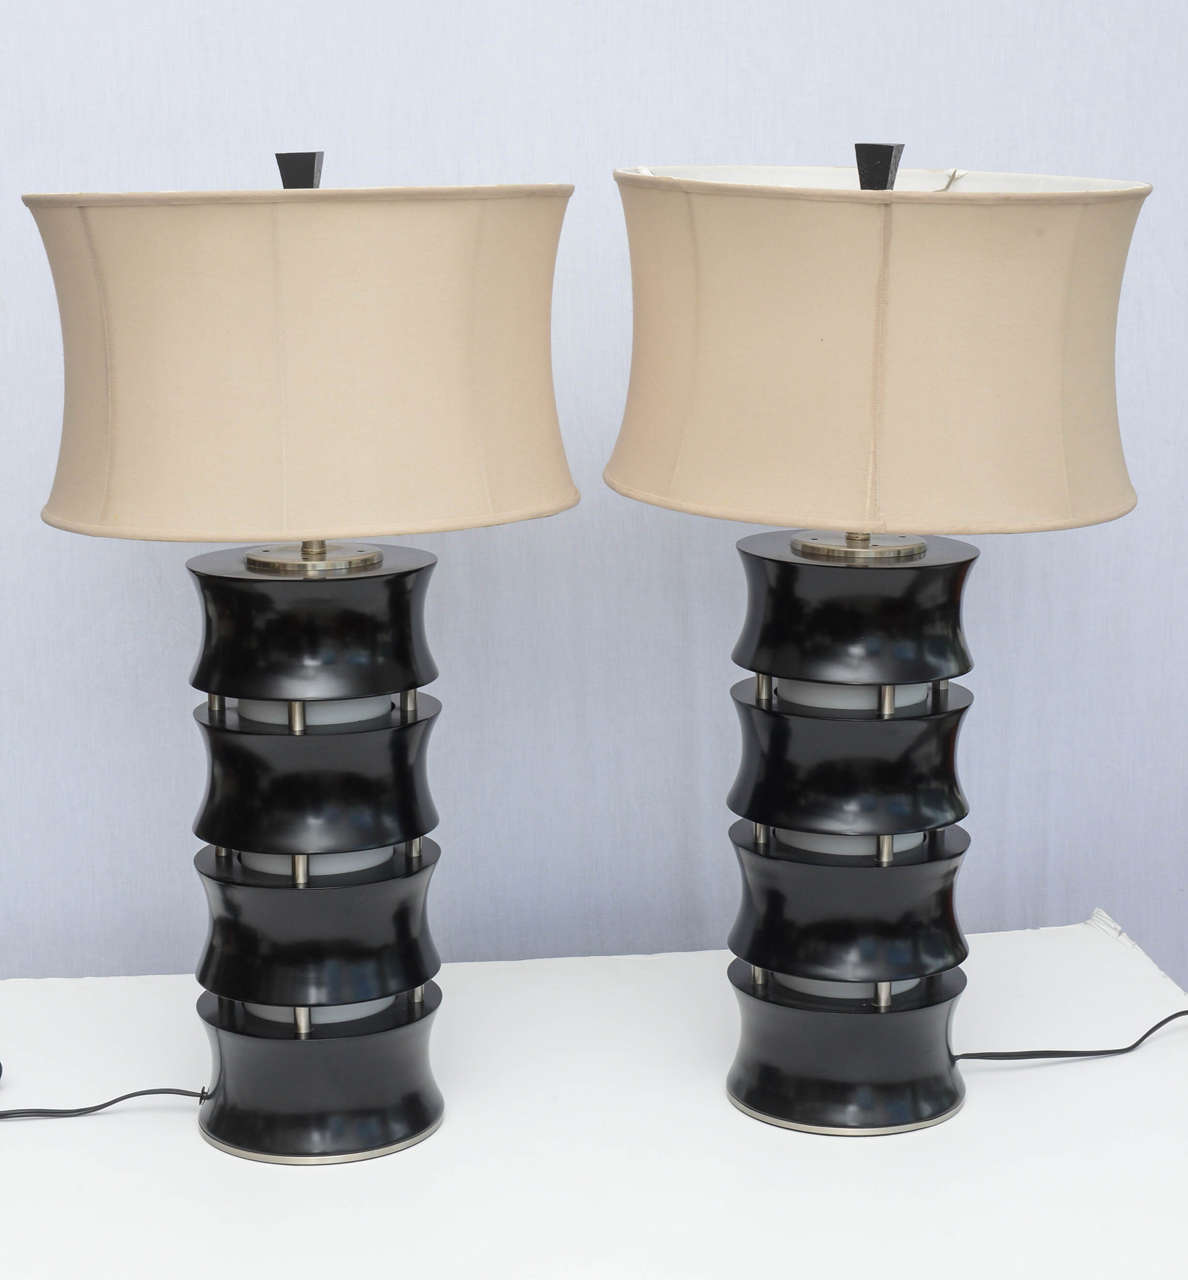 Wonderful pair of wooden lamps with interior lighting as well as traditional top lighting.  Casts a gorgeous ambient light from inside or a traditional light from the top.  1959 USA